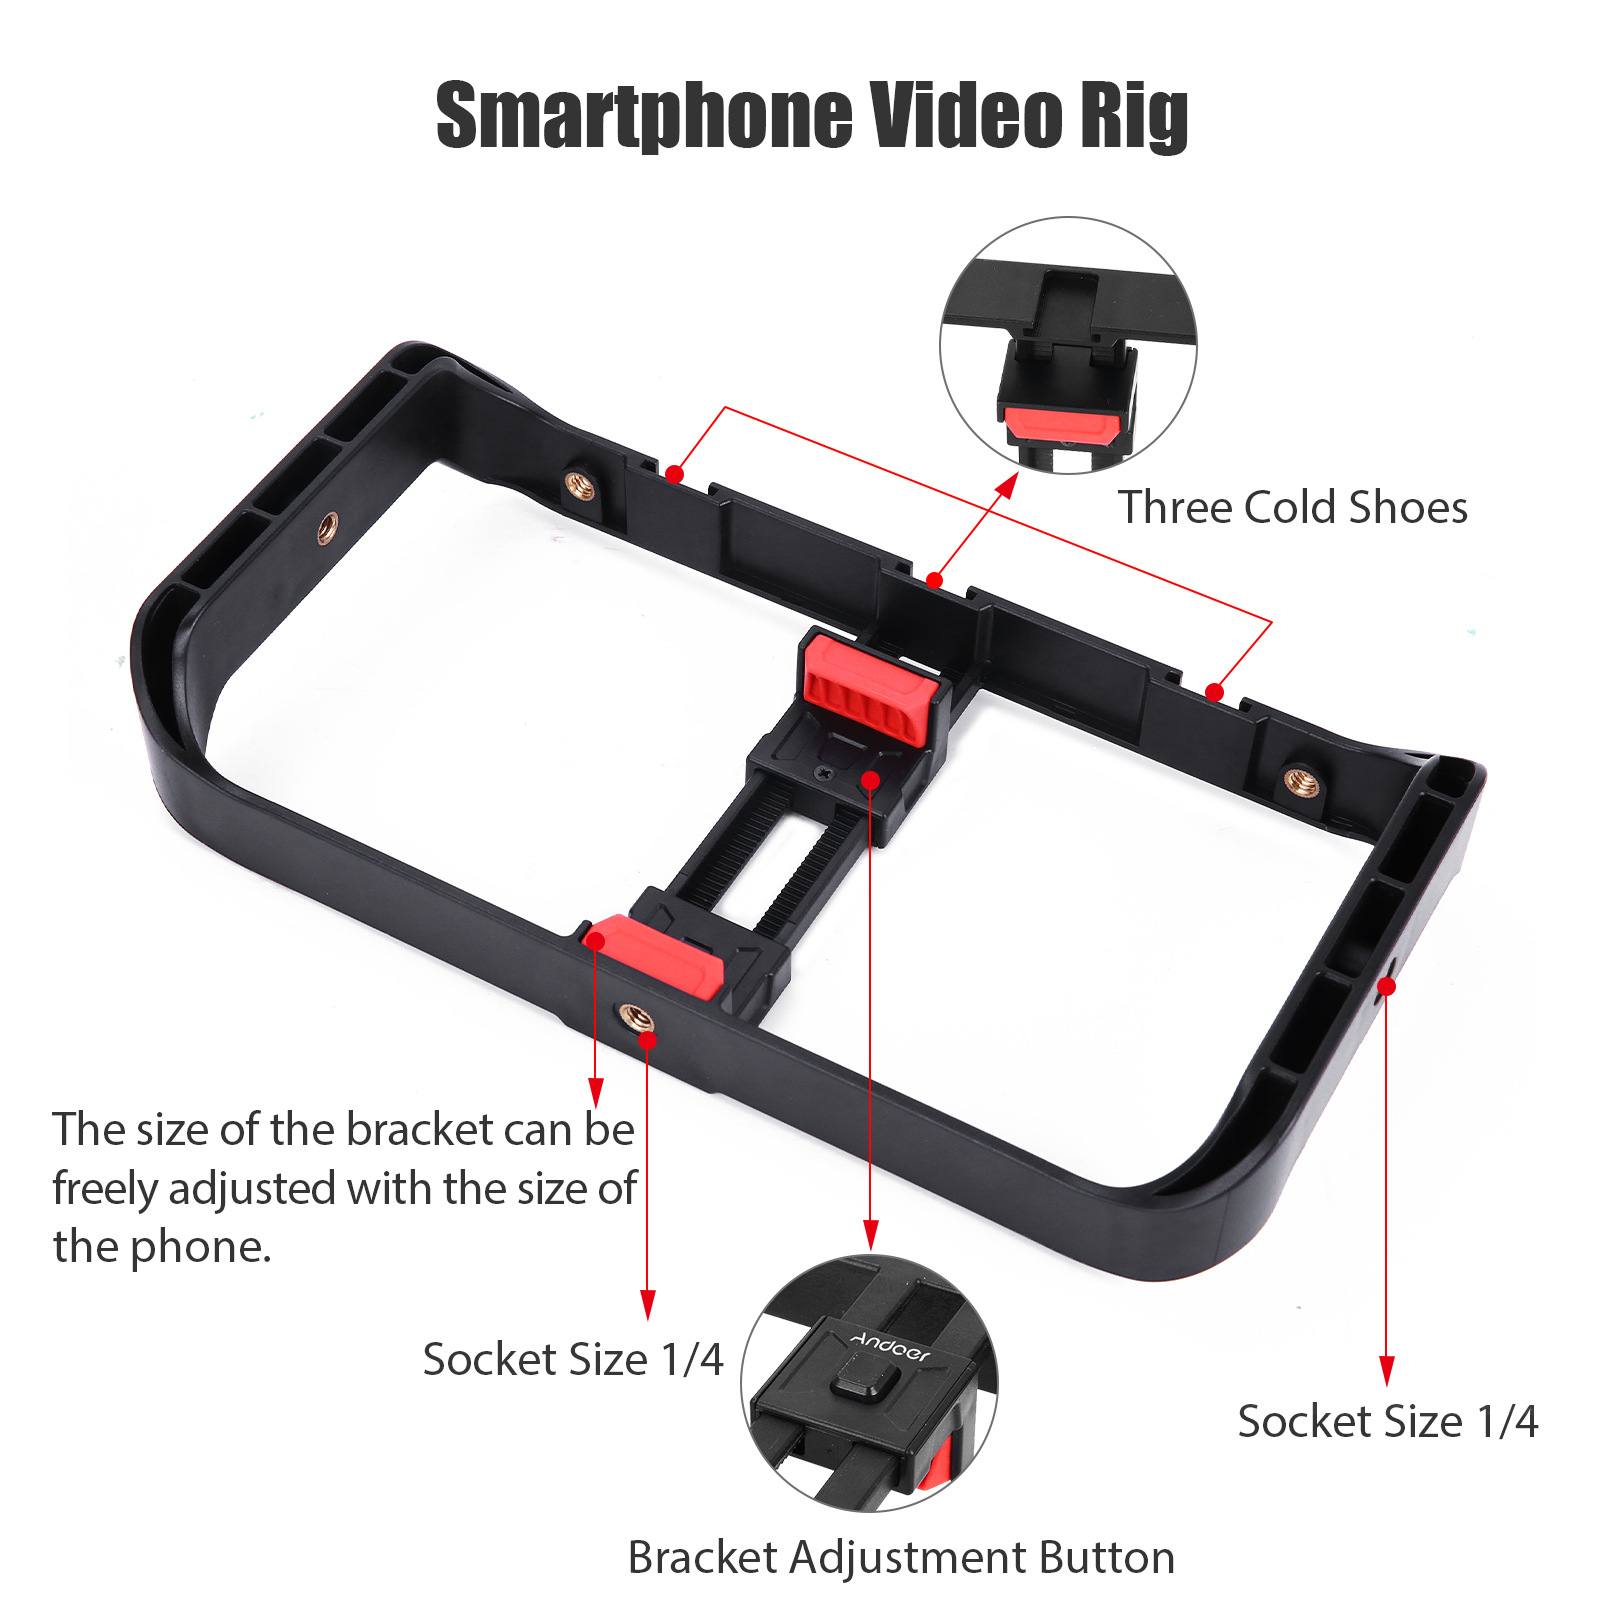 Andoer Portable Smartphone Video Rig Handheld Phone Stabilizer Grip Filmmaking Smartphone Cage with Phone Holder 3 Cold Shoe Mounts 14 Inch Screw Holes Replacement for 1212 Pro/ 12 Pro Max1 - image 4 of 7